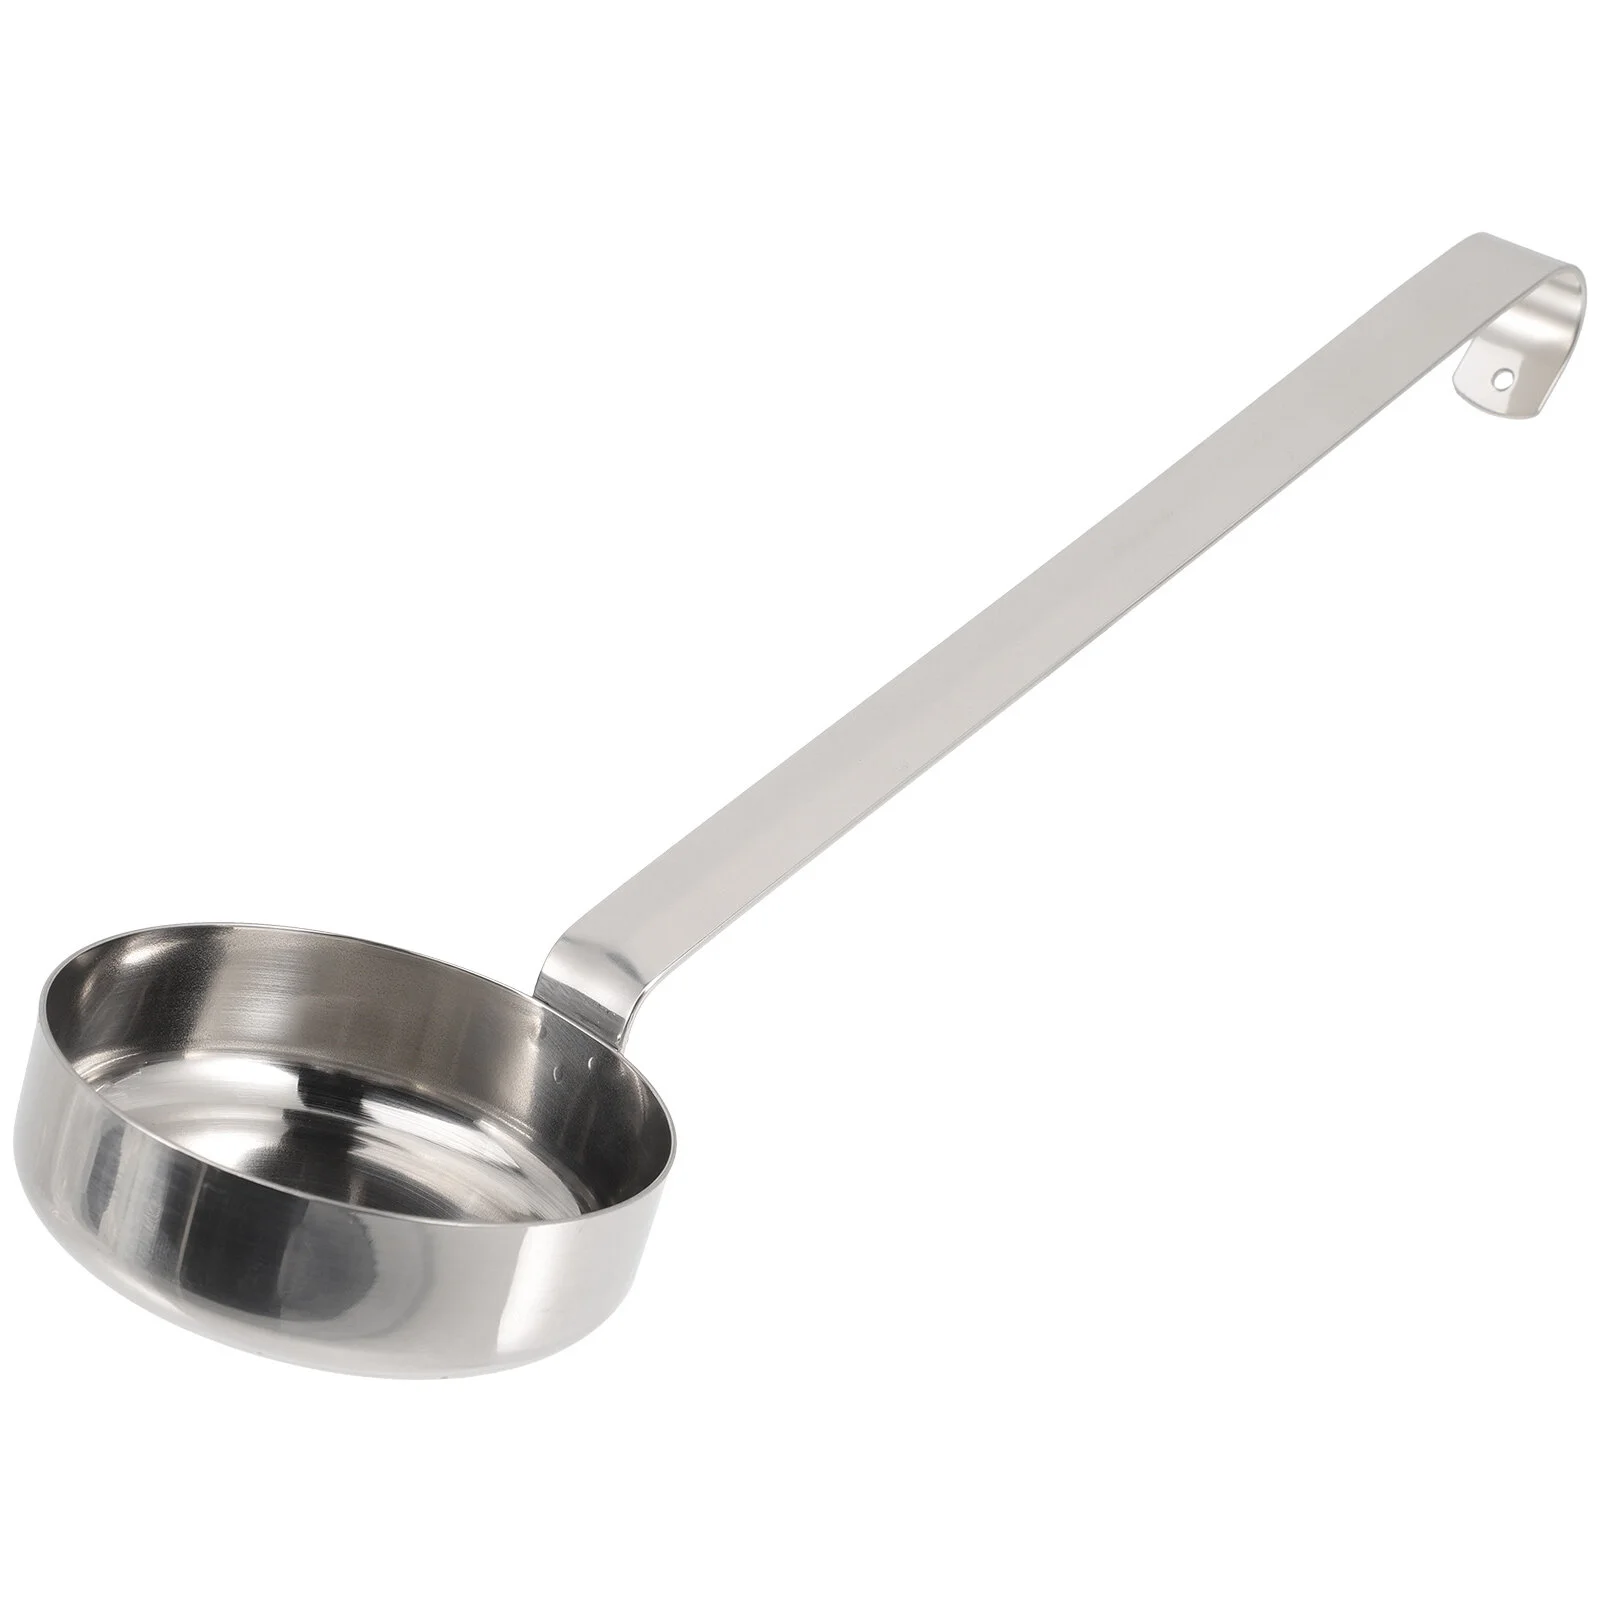 

Ladle Spoon Sauce Pizza Mini Pizzaer Soup Mini Pizza Kitchen Serving Spread Control Spoons Measuring Scoop Steel Stainless Food